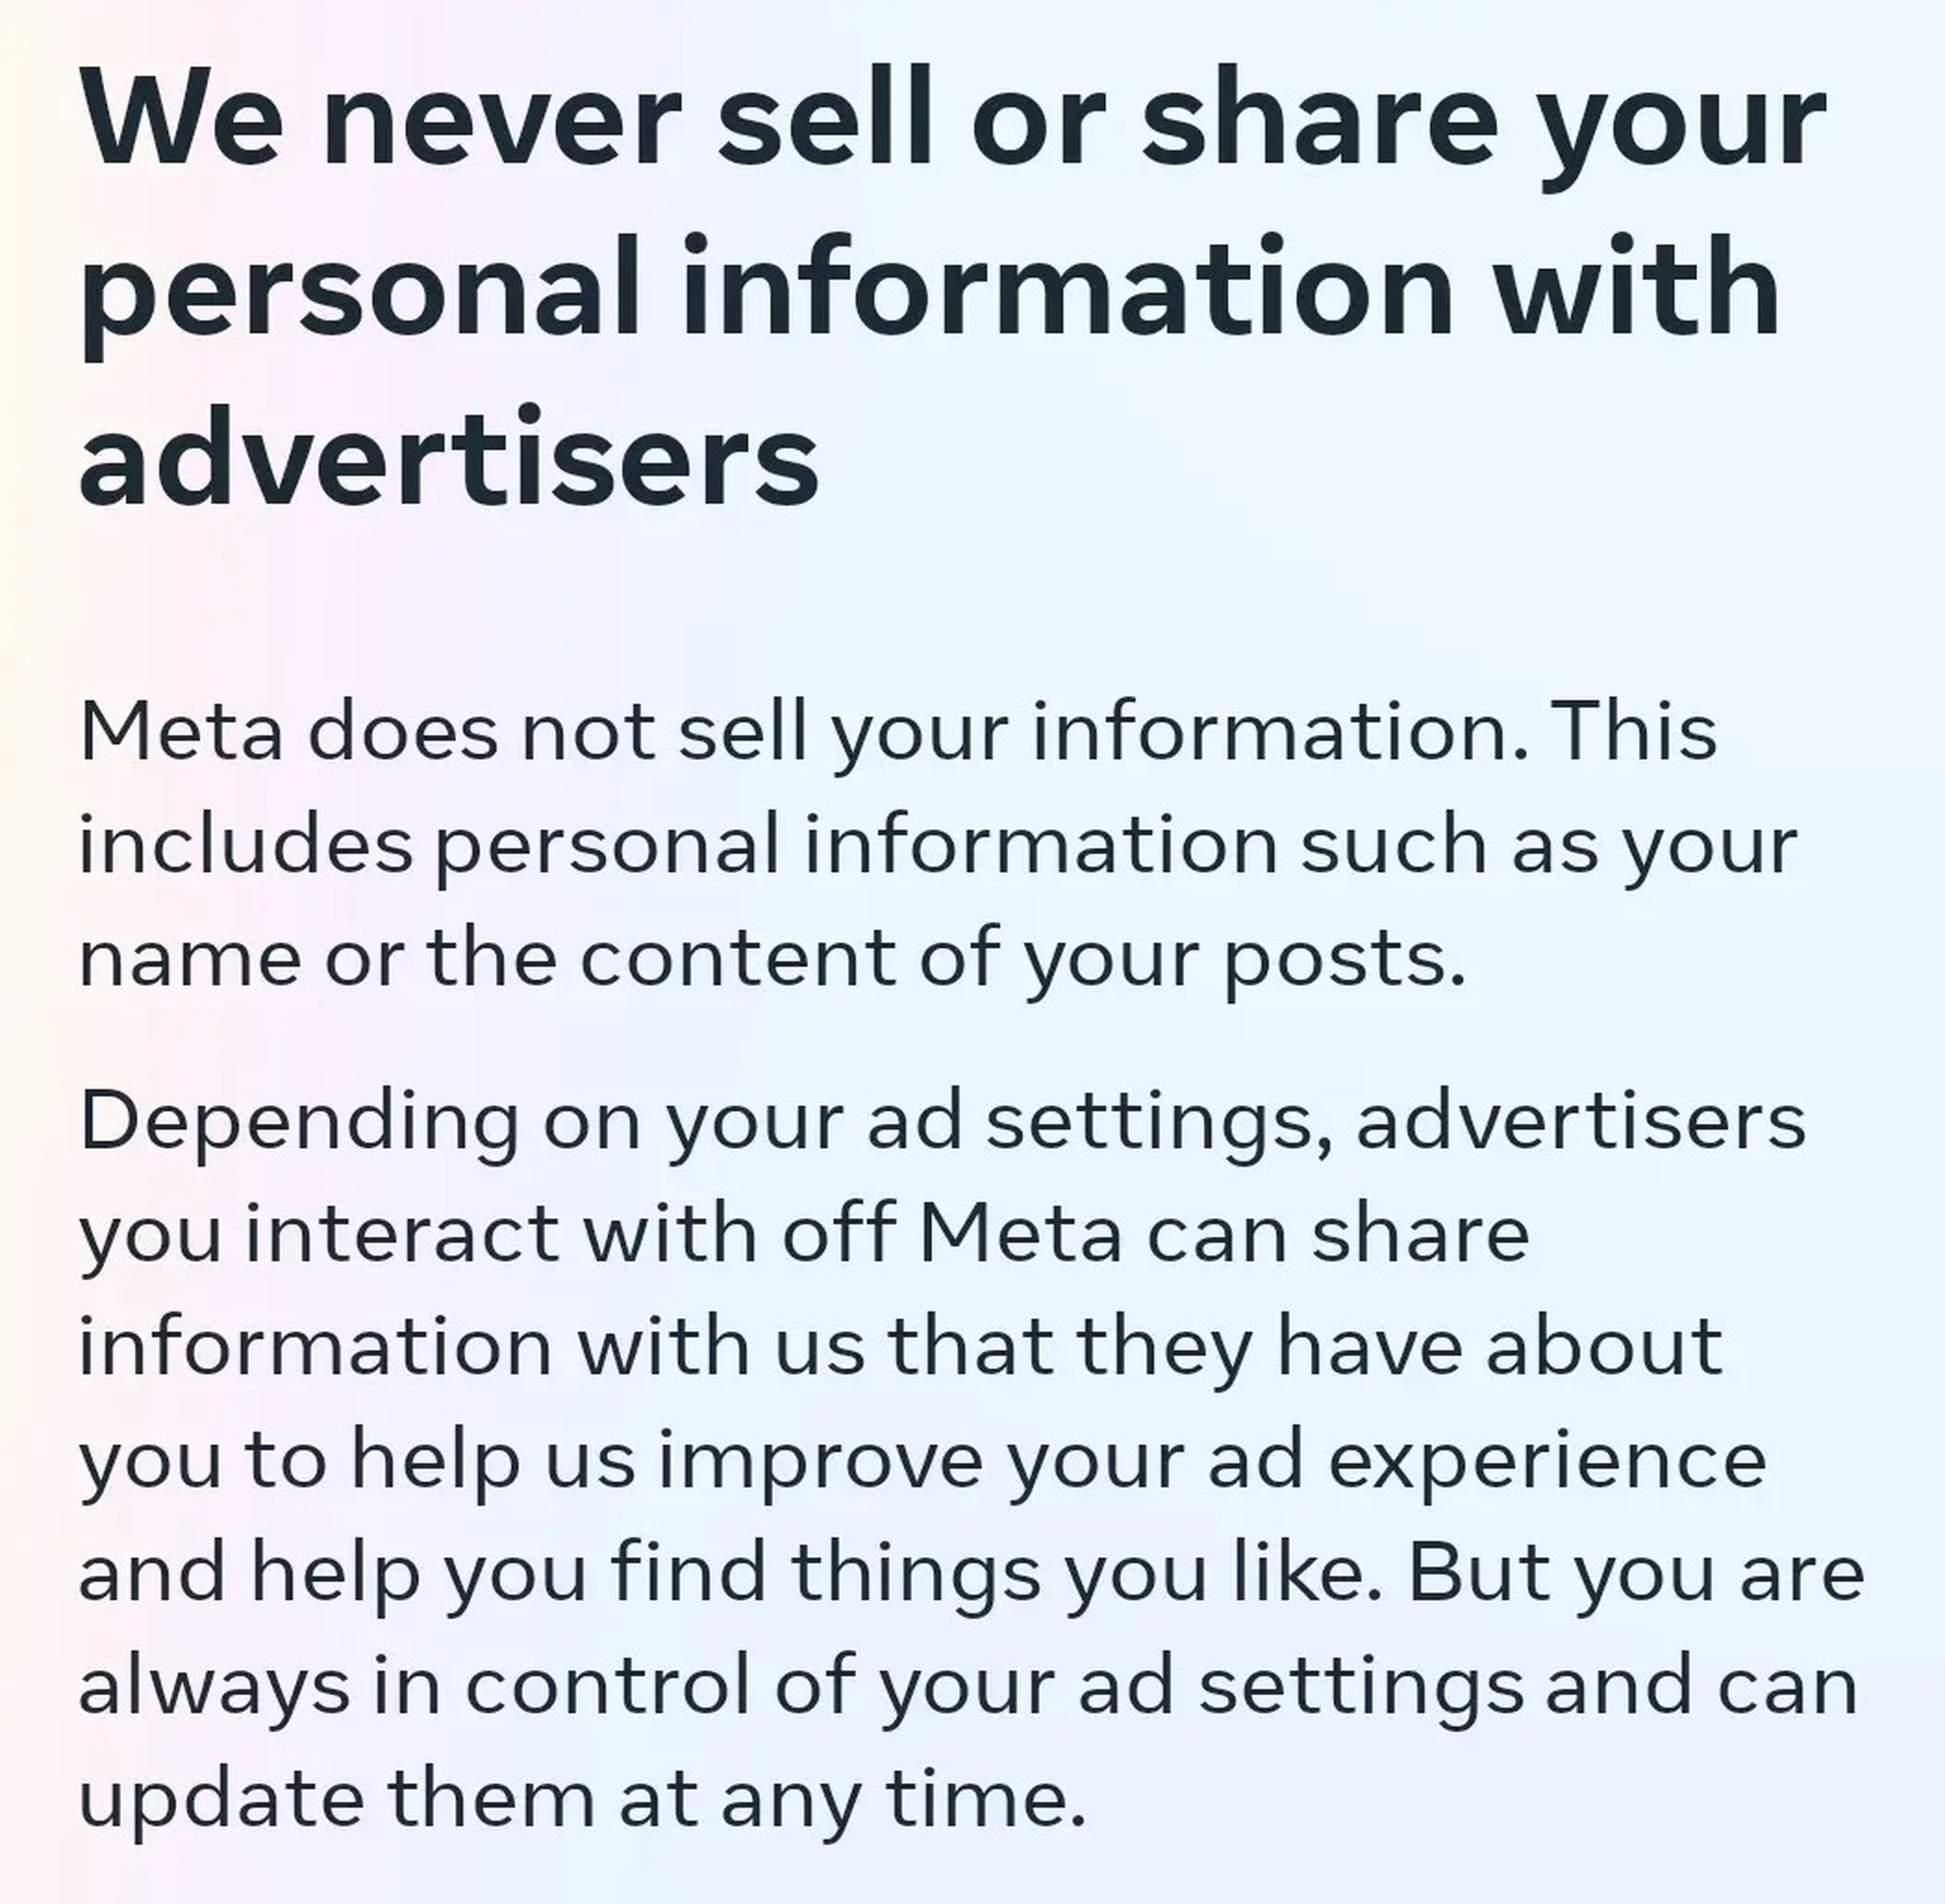 Screenshot from Meta ads page information